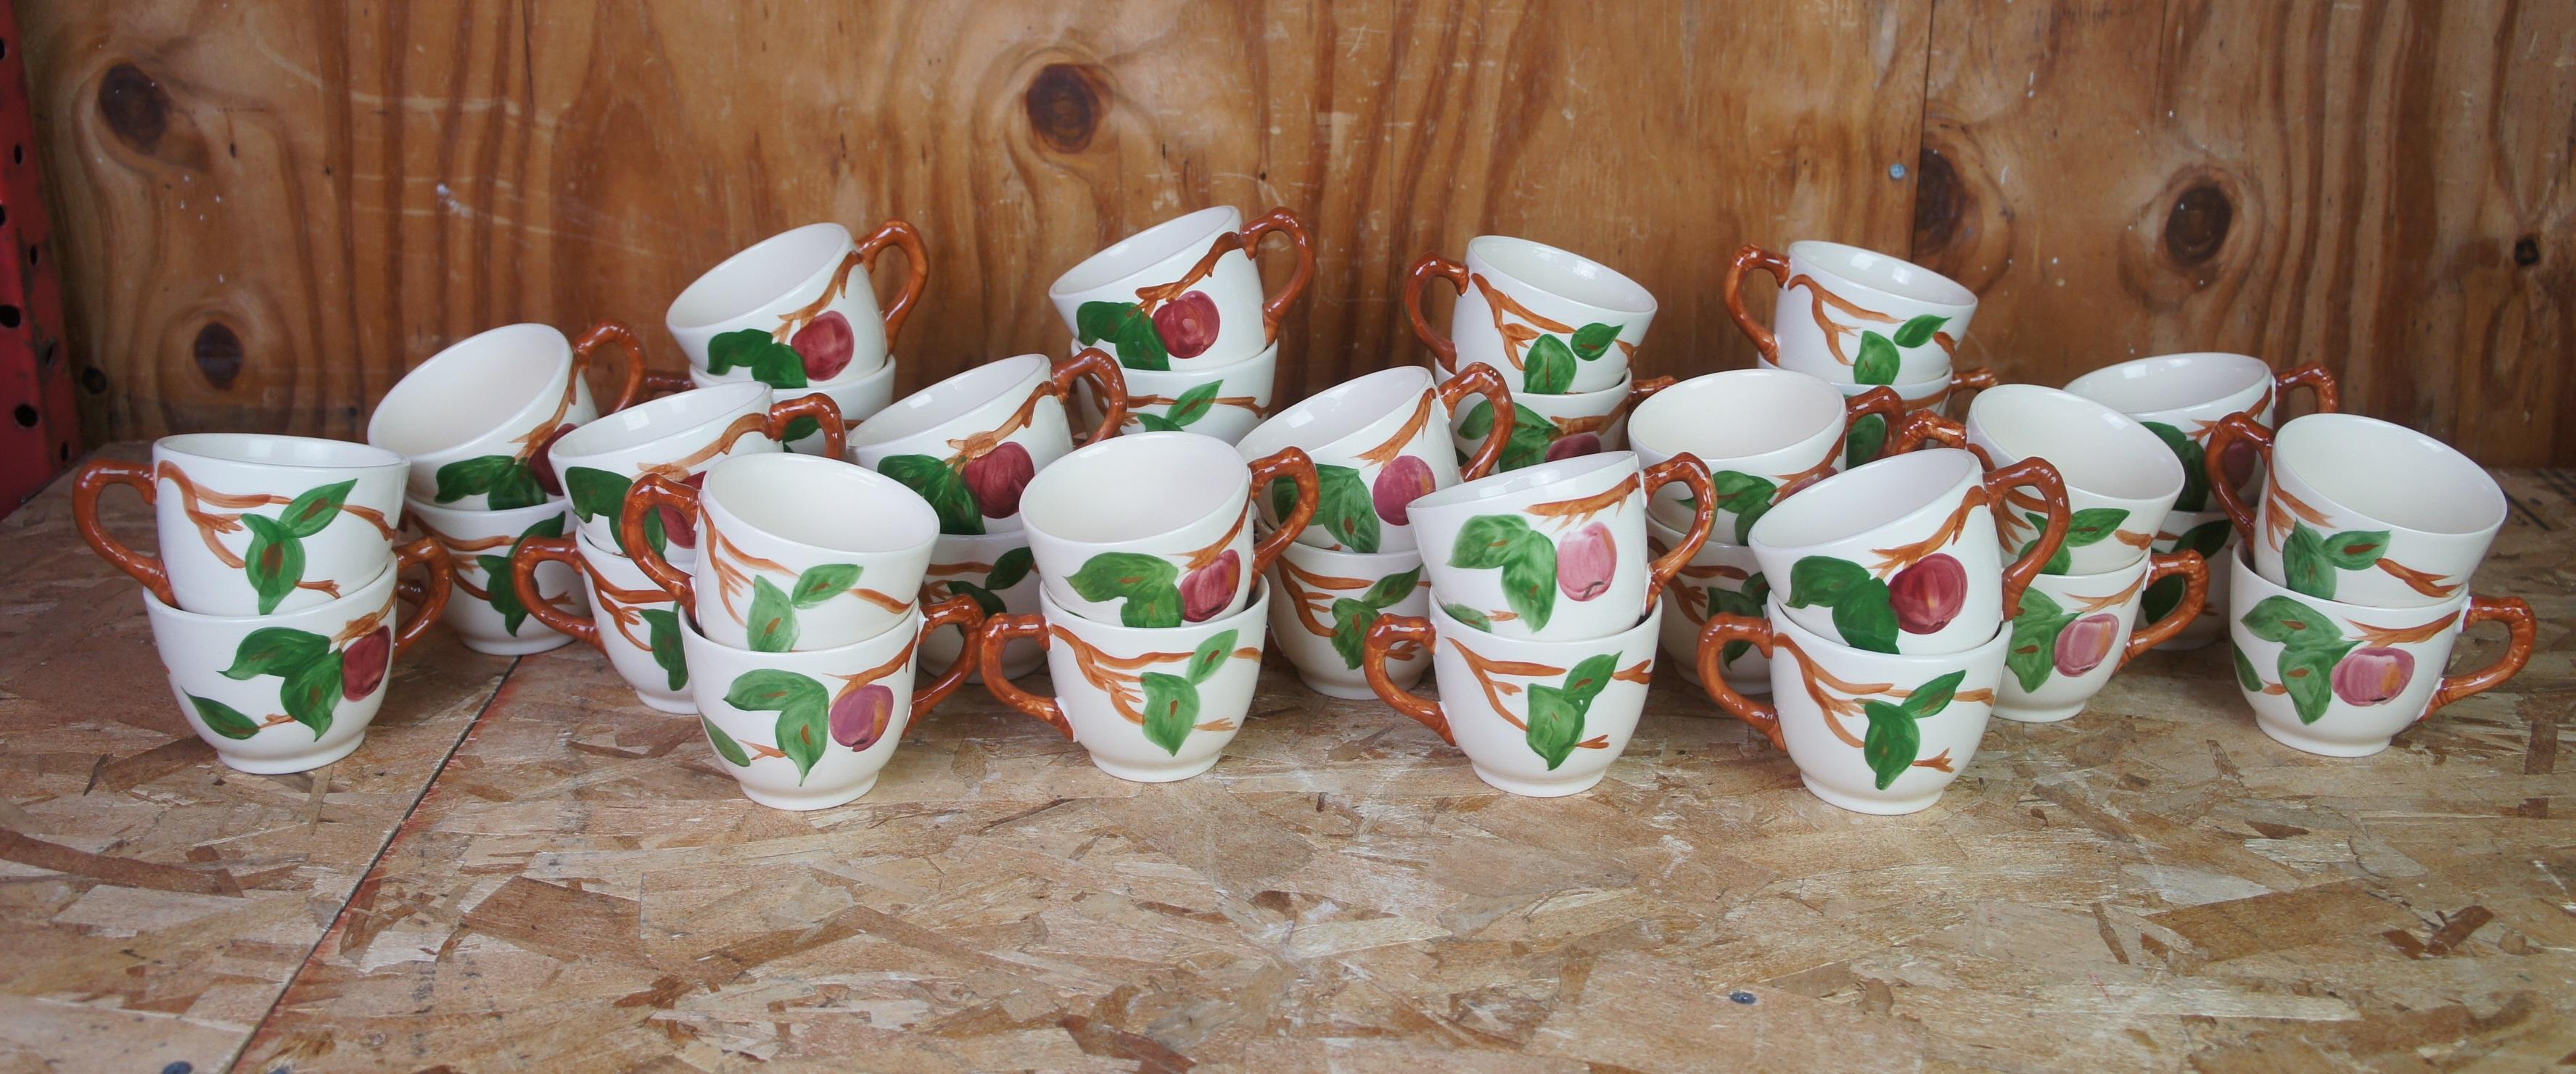 Porcelain 120 Piece Vintage Franciscan Apple Pattern Dinnerware Hand Painted USA England For Sale